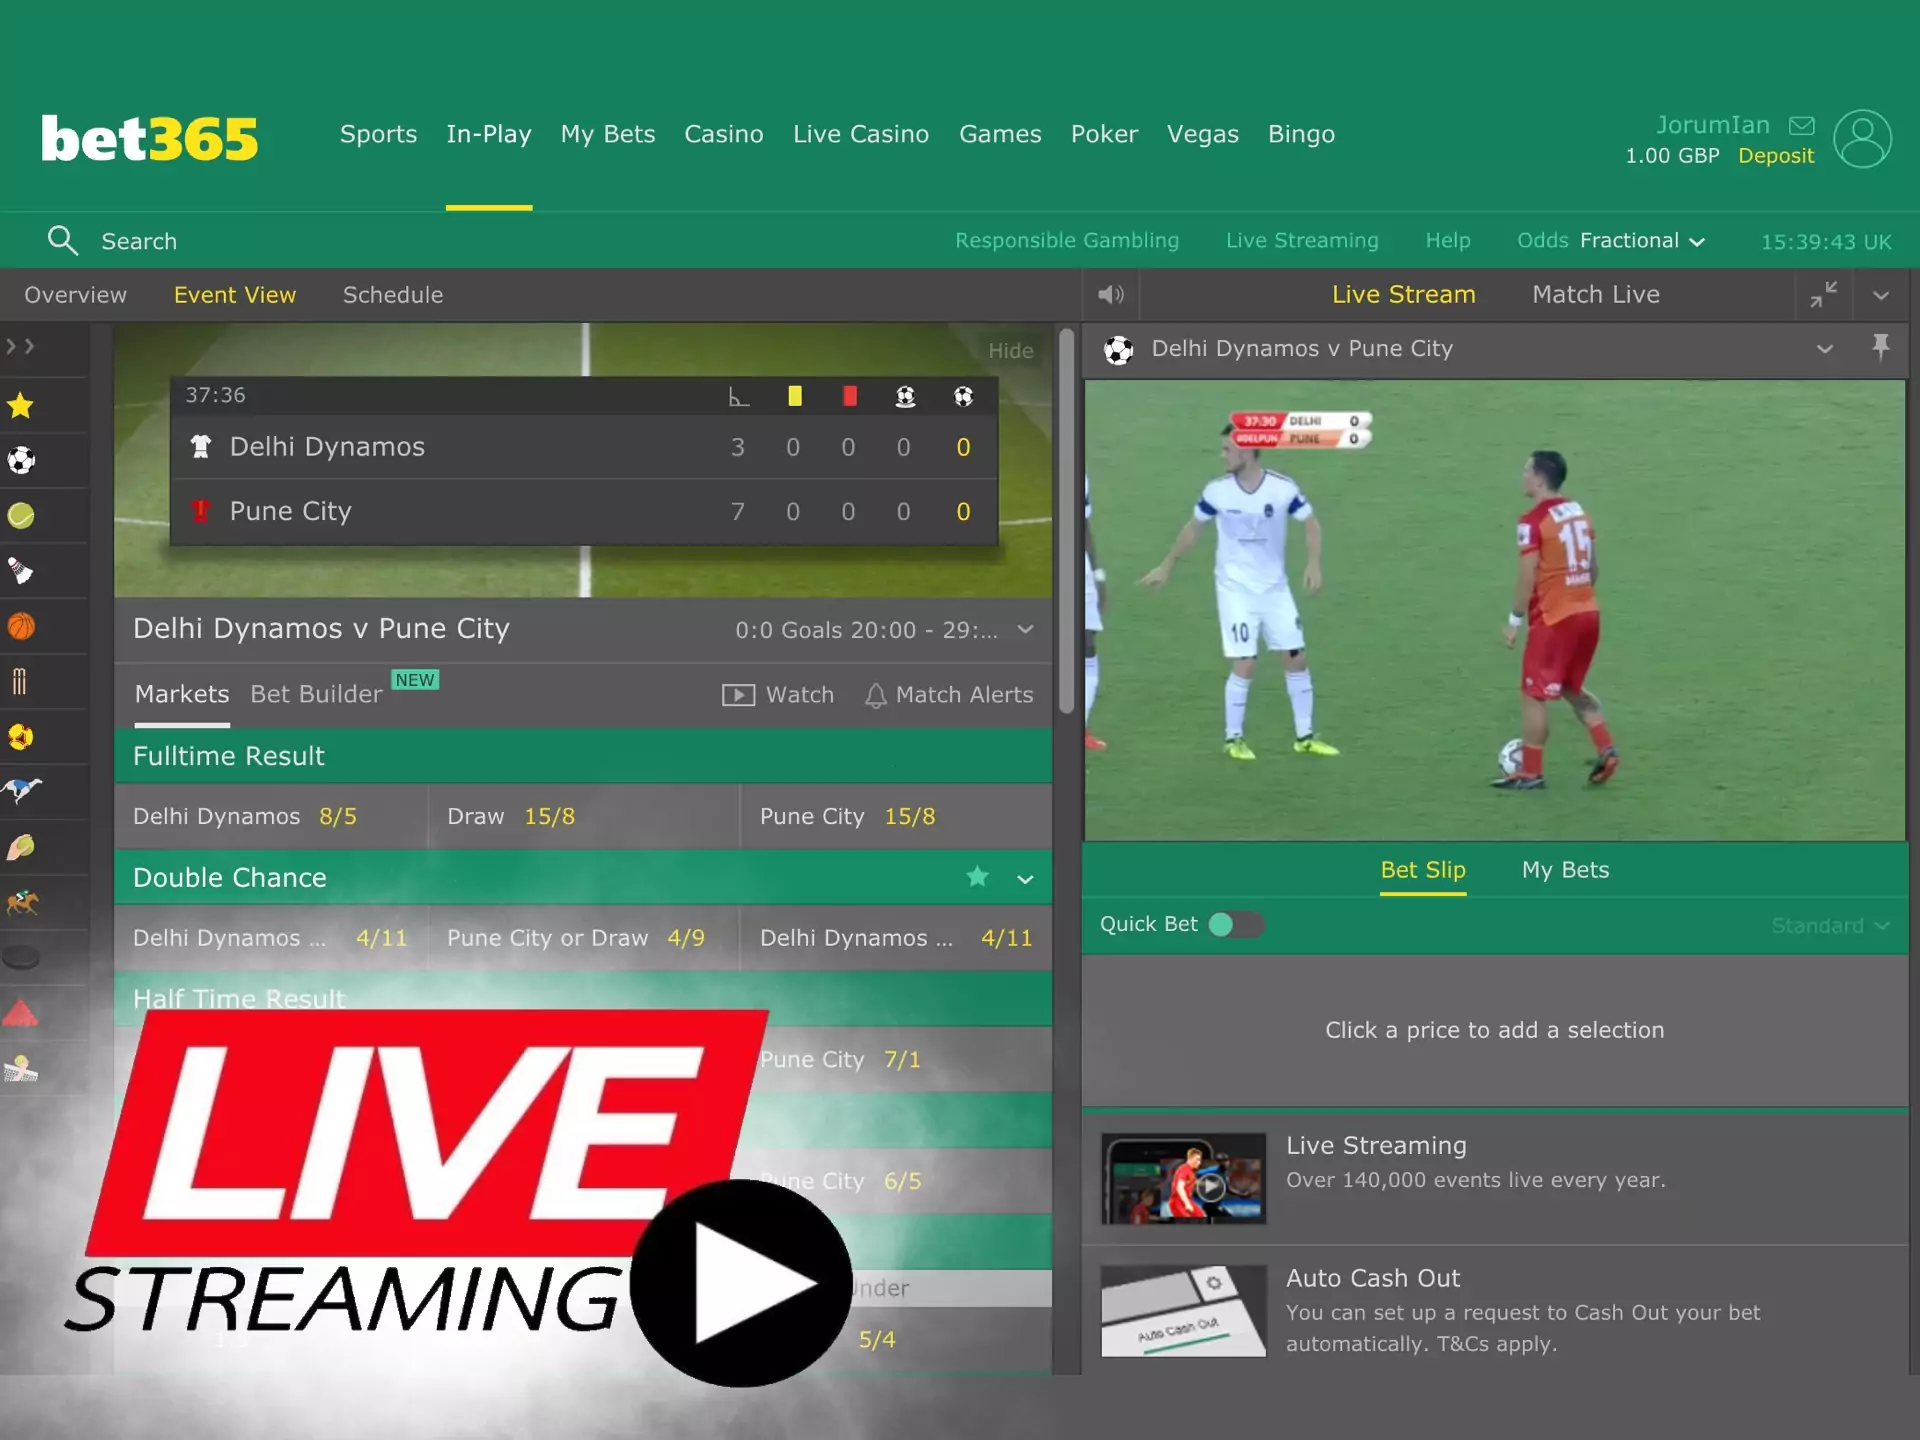 Watch sports events' streamings and place live bets.